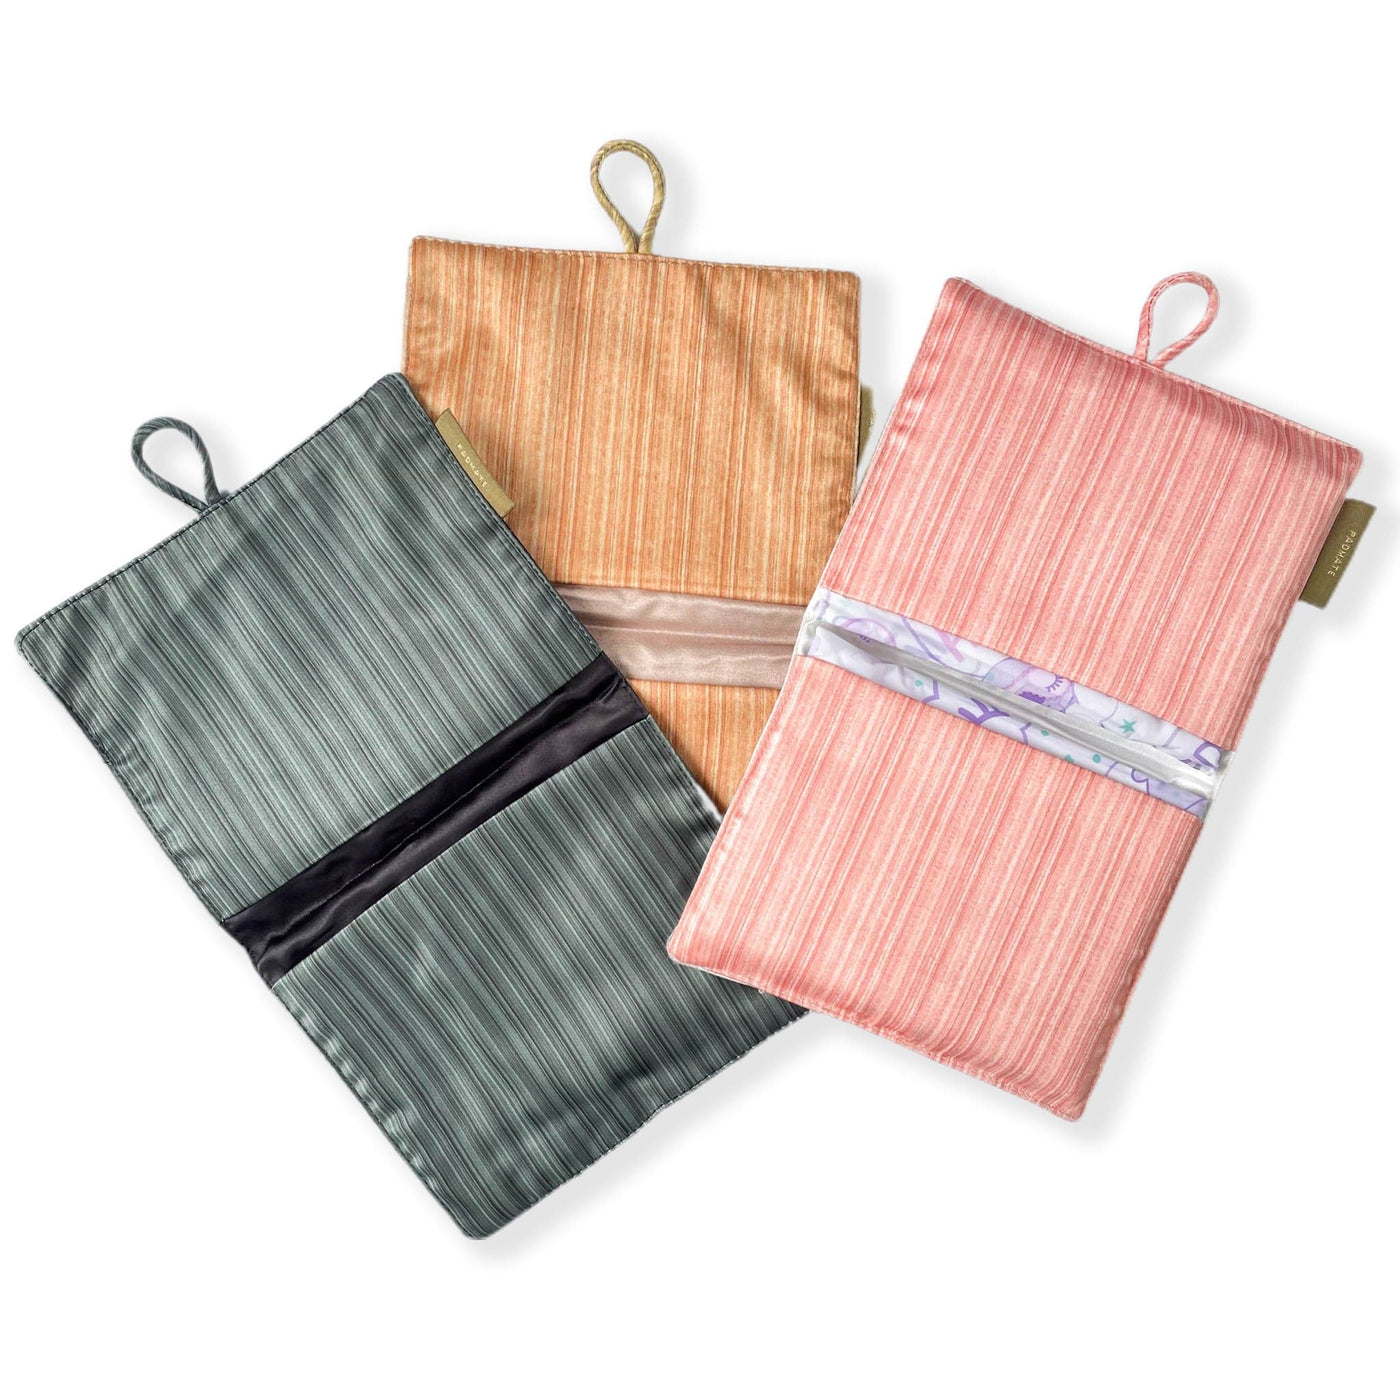 Fabric Pandit Padmate PADMATE Silk Blend Sanitary Pad Pouch - Elint Of Happiness - Pack of 3